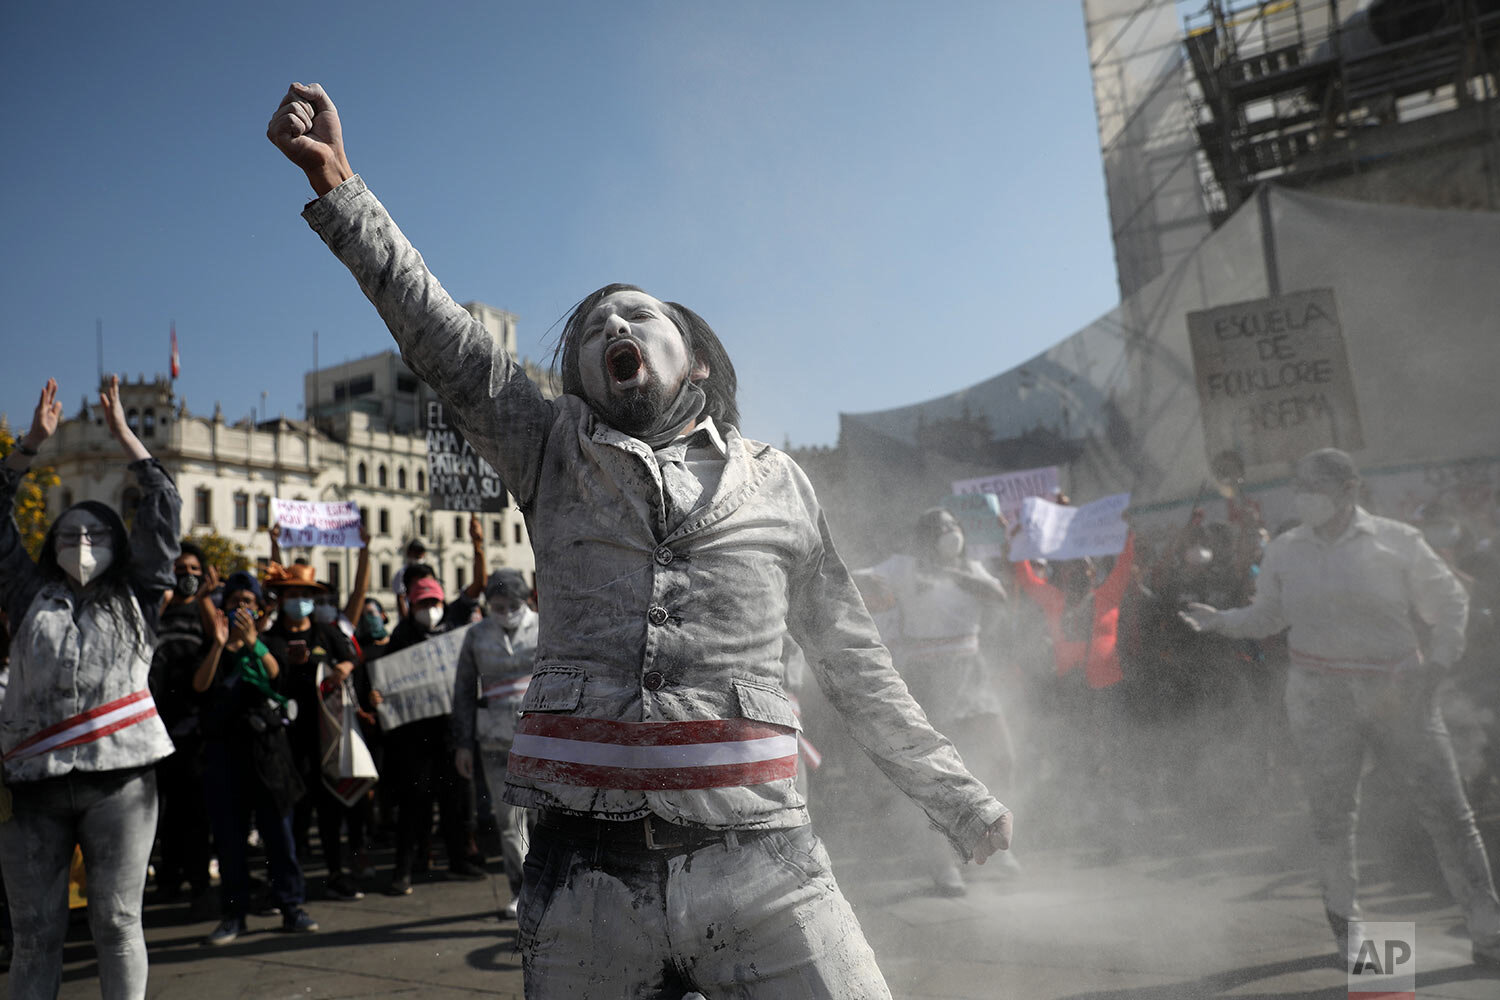  A man who is dressed as a zombie wears a presidential sash to represent himself as a minister of Peru's newly sworn-in president, gets revved up in San Martin plaza where people who are refusing to recognize the new government gather to protest, in 